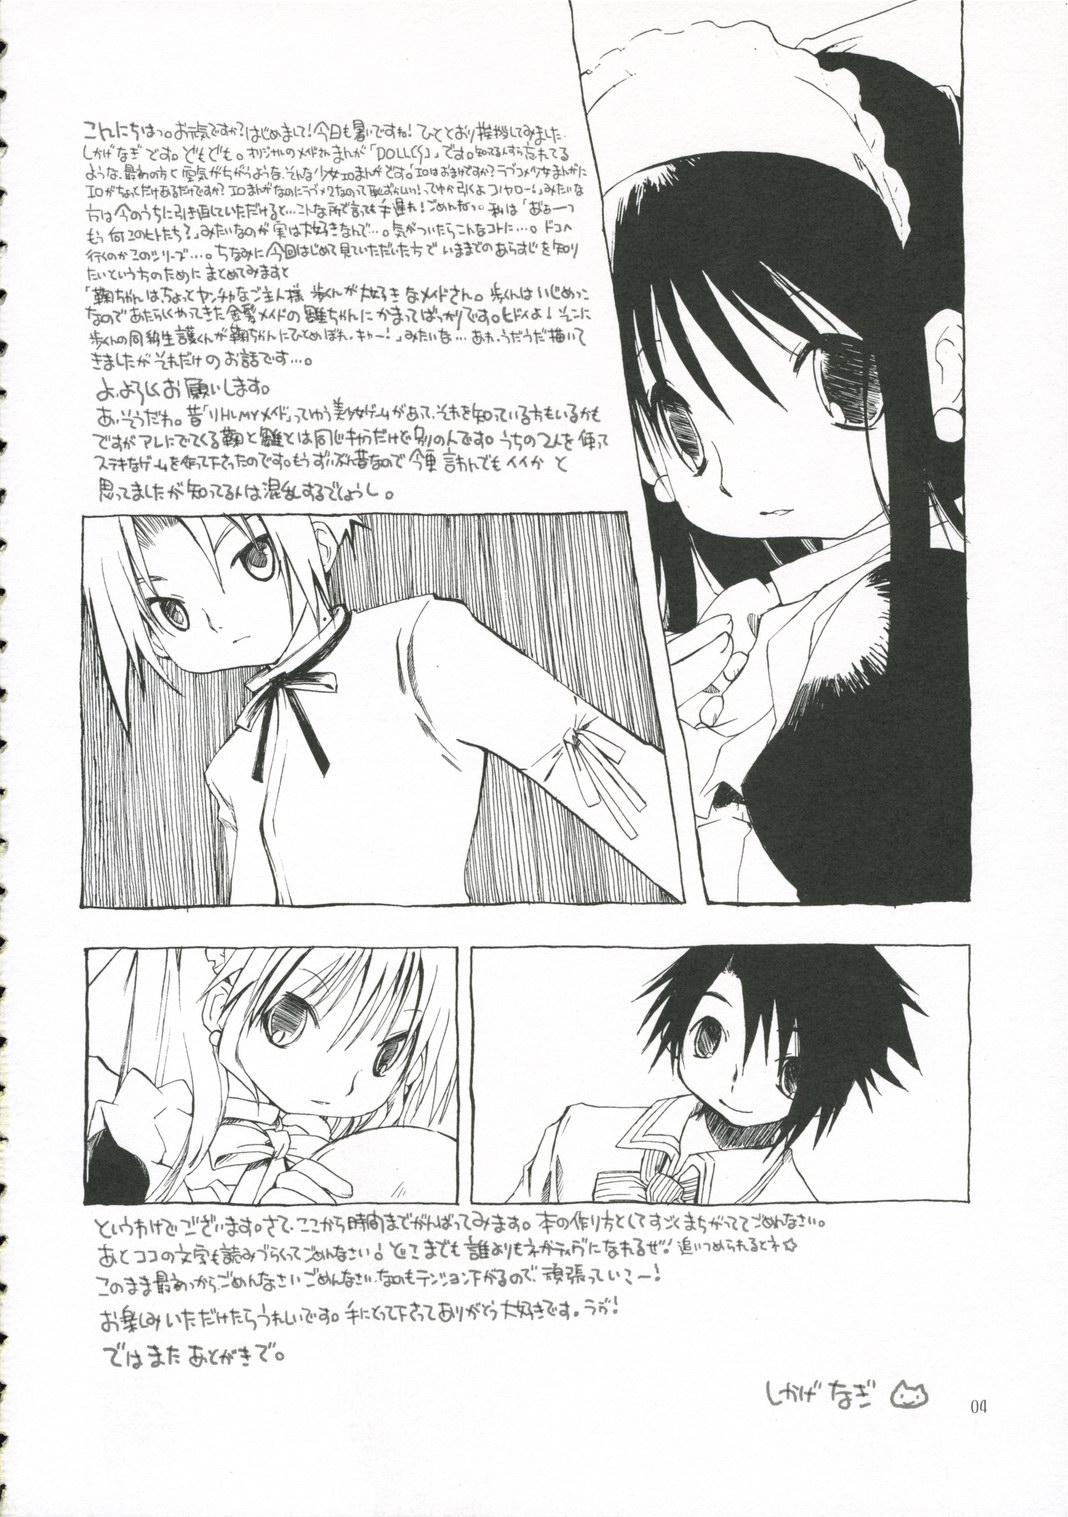 Buttfucking (C70) [Pink no Chao! (Shikage Nagi)] DOLL[S] 07:LITTLE GOOD-BYE (Little My Maid) Canadian - Page 3